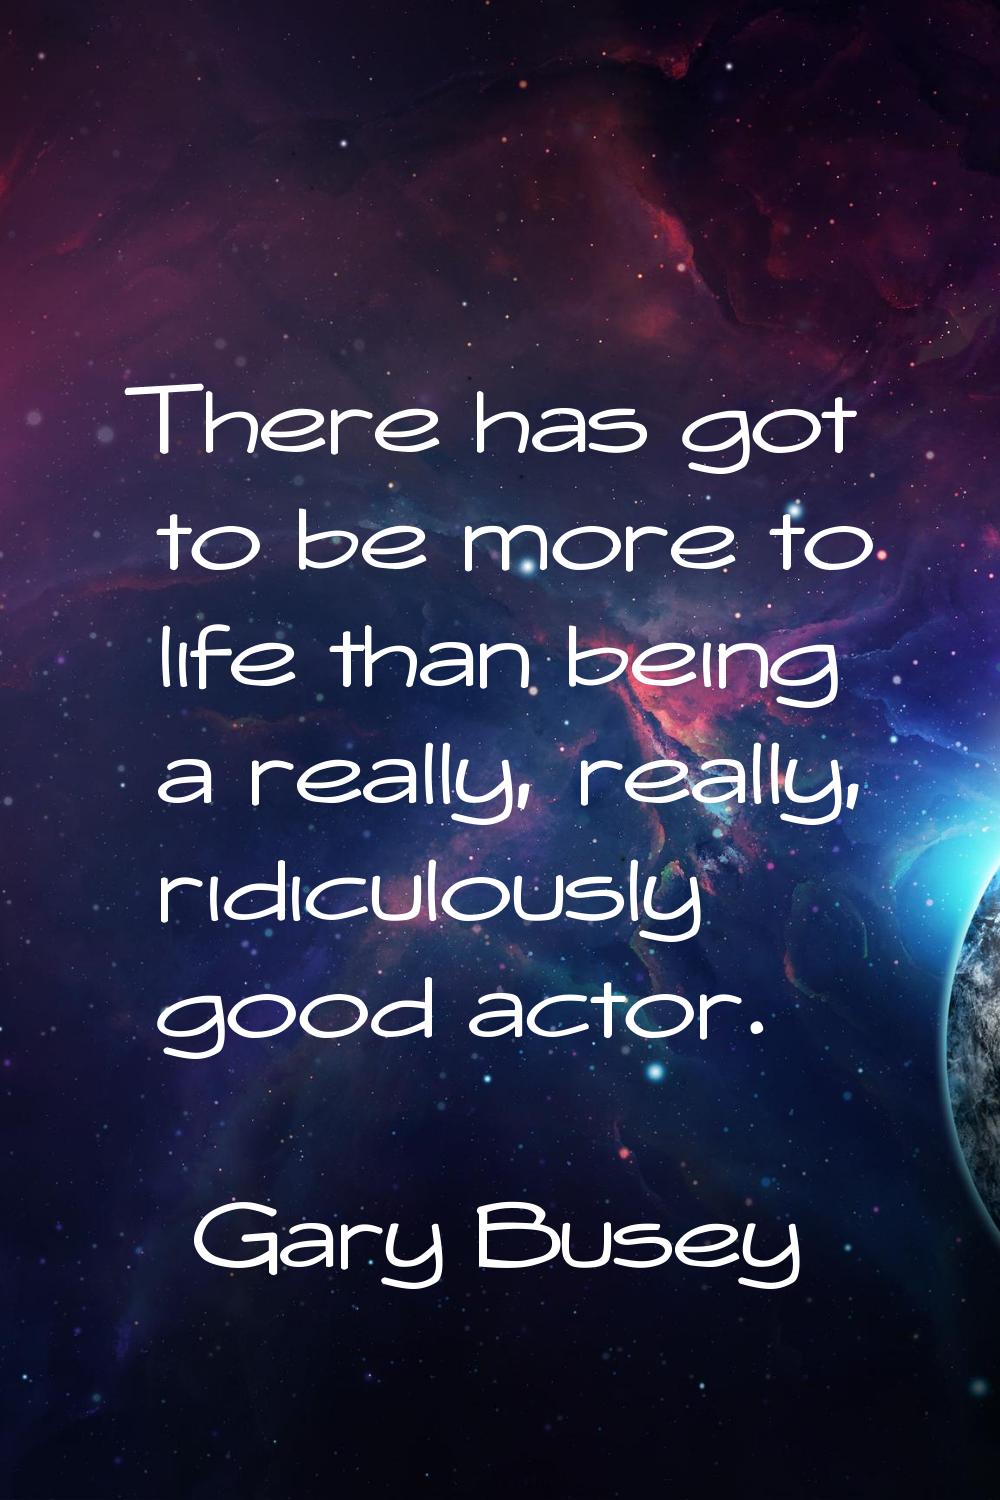 There has got to be more to life than being a really, really, ridiculously good actor.